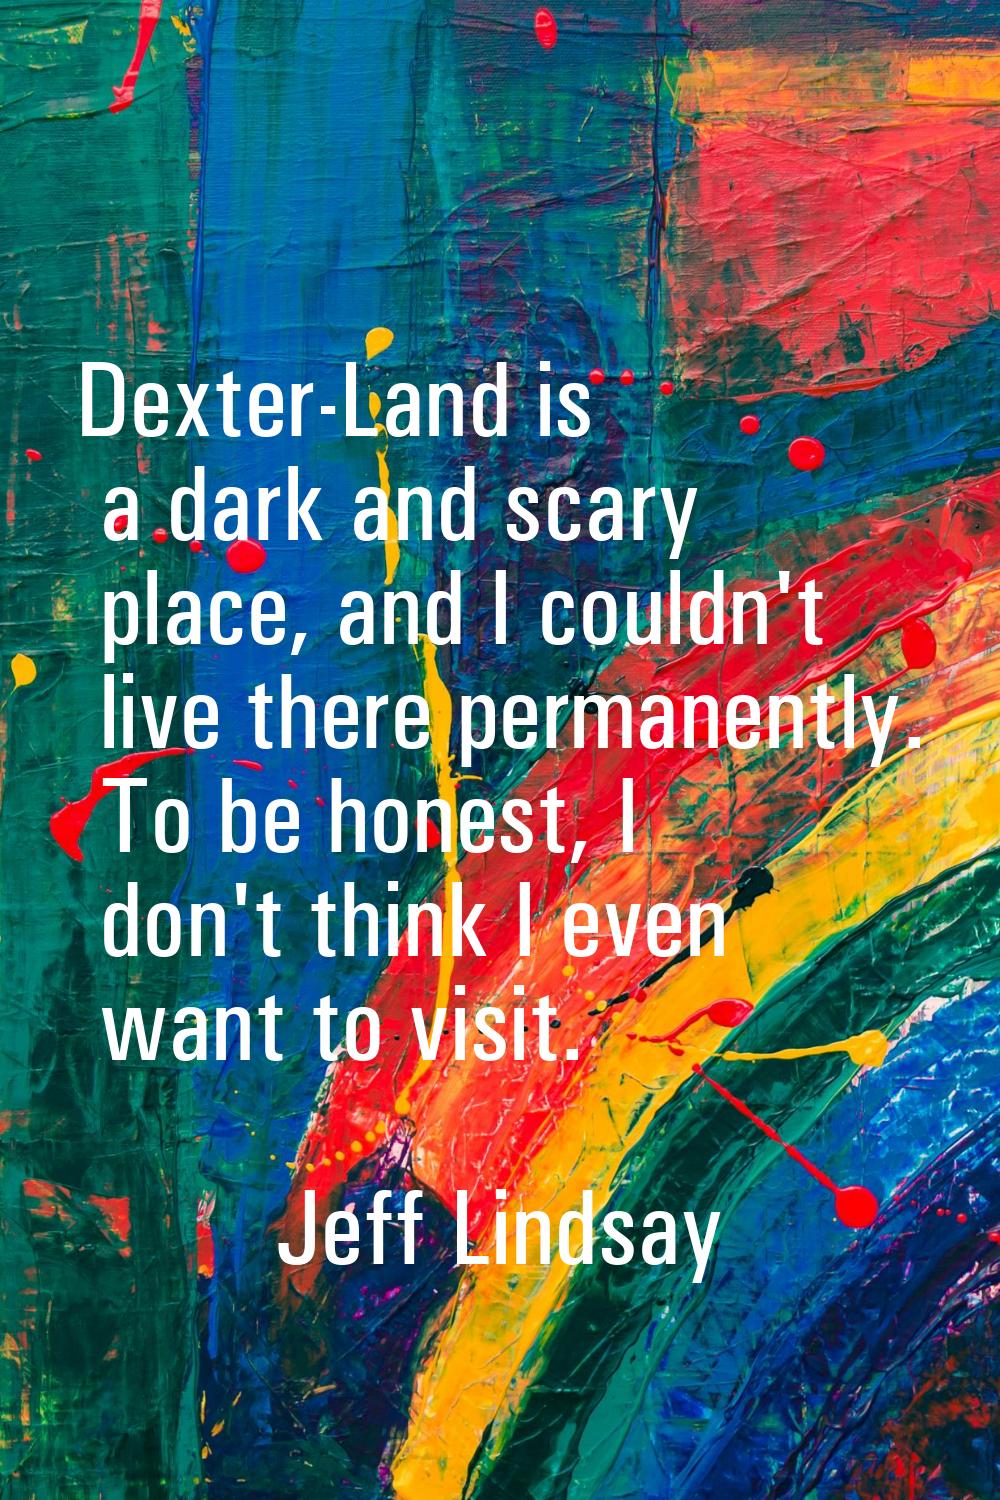 Dexter-Land is a dark and scary place, and I couldn't live there permanently. To be honest, I don't